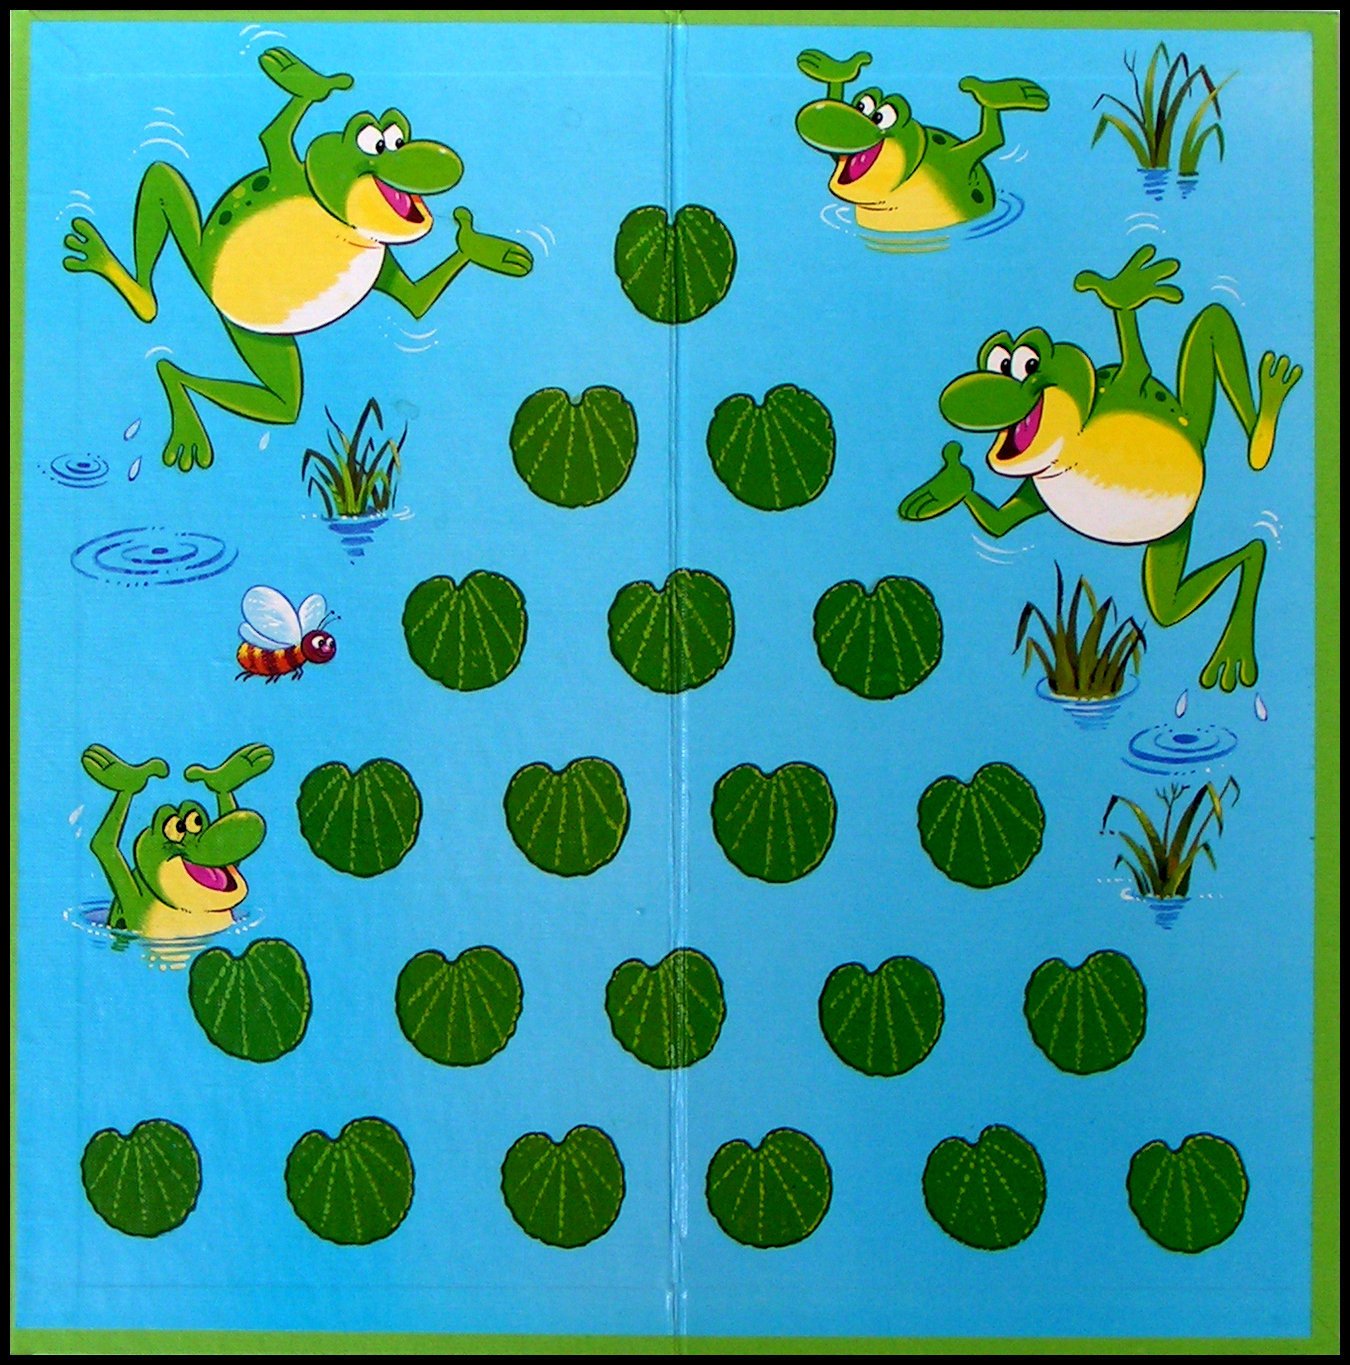 Leap Frog - The Game Board